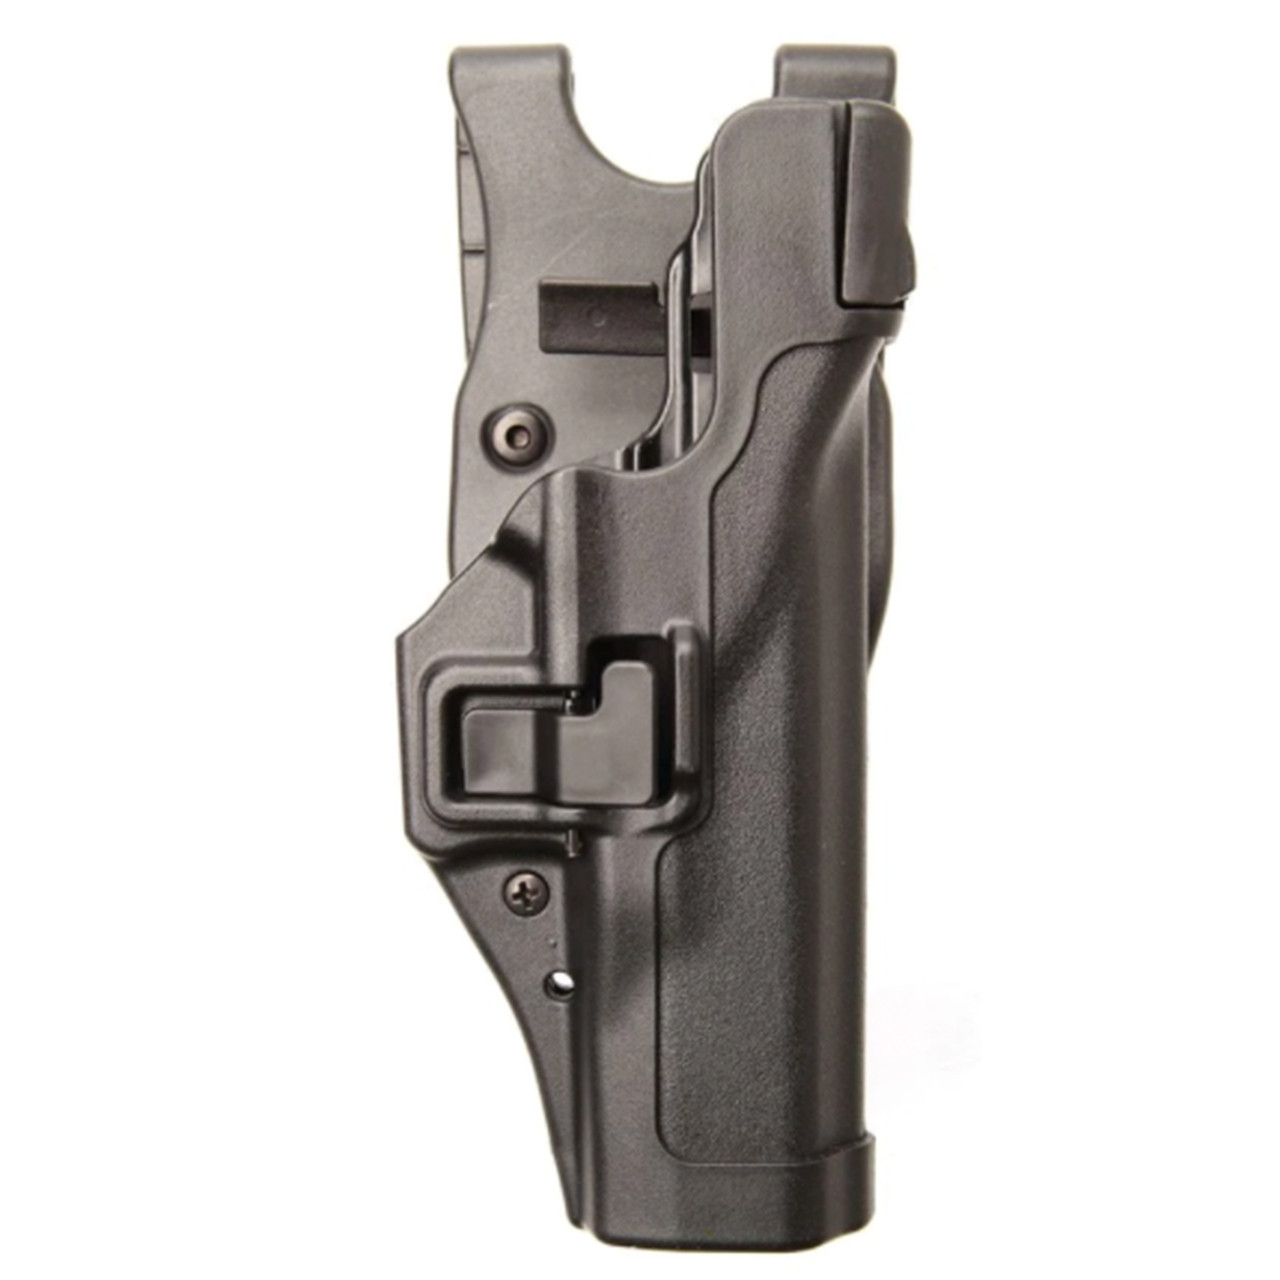 BLACKHAWK 44H1 SERPA LEVEL 3 DUTY HOLSTER, FEATURING AUTO-LOCK TECHNOLOGY, Full-length holster body protects rear sights, Includes innovative Jacket Slot Duty Belt Loop